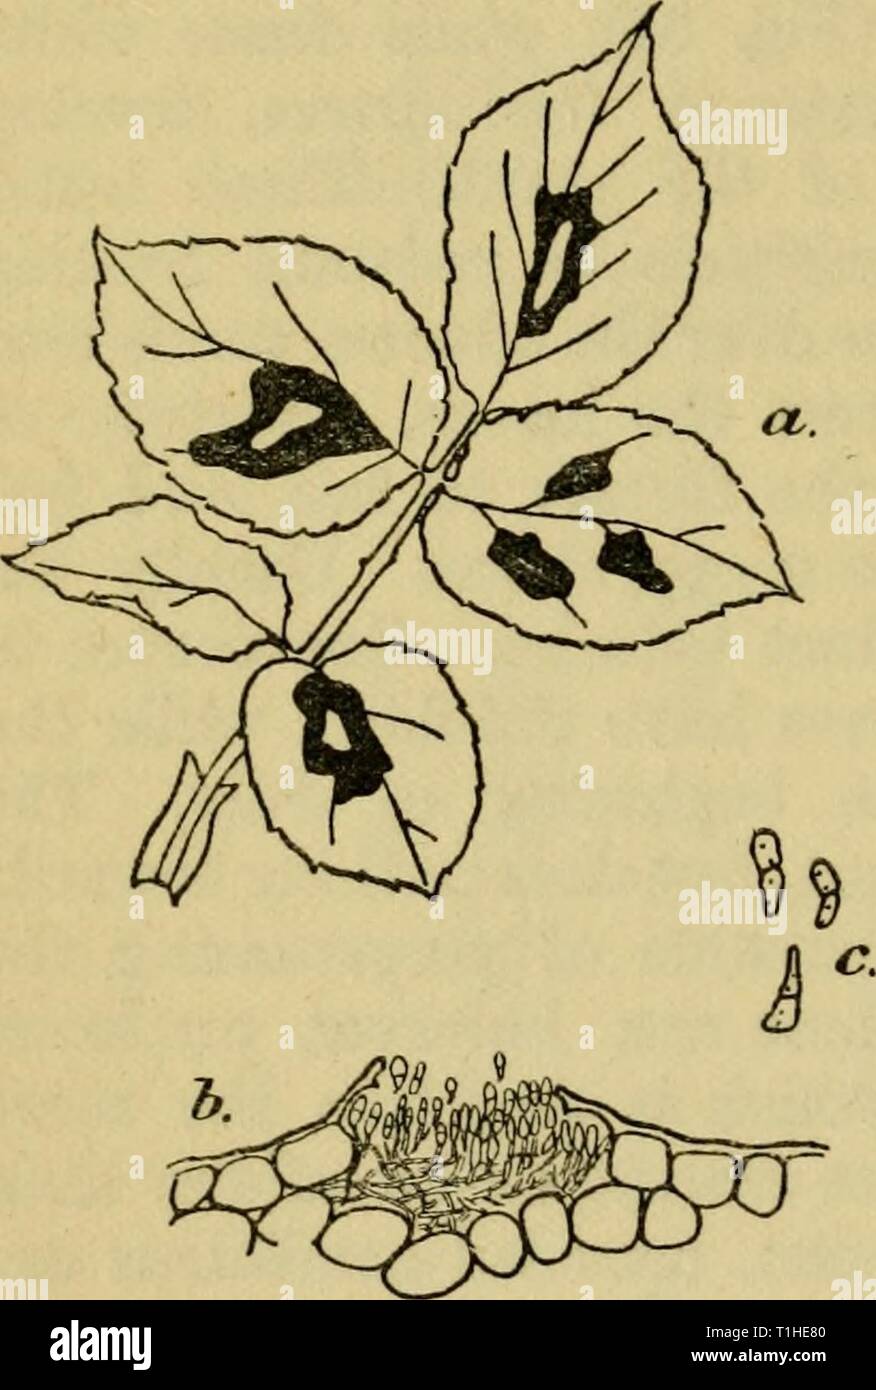 Diseases of glasshouse plants (1923) Diseases of glasshouse plants  diseasesofglassh1923bewl Year: 1923  112 DISEASES OF GLASSHOUSE PLANTS produced on the upper surface of the leaves, varying in diameter from an eighth of an inch to patches covering haK the leaf. (Fig. 32). The tissue round the spots turns yellow, and, as the spots become old, minute dark pycnidia or fruiting bodies are distributed over the surface. Ulti- mately the leaves fall, and as the diseased plants lose their fohage they become weakened and stunted blooms are produced. On the diseased areas conidia are produced in great Stock Photo